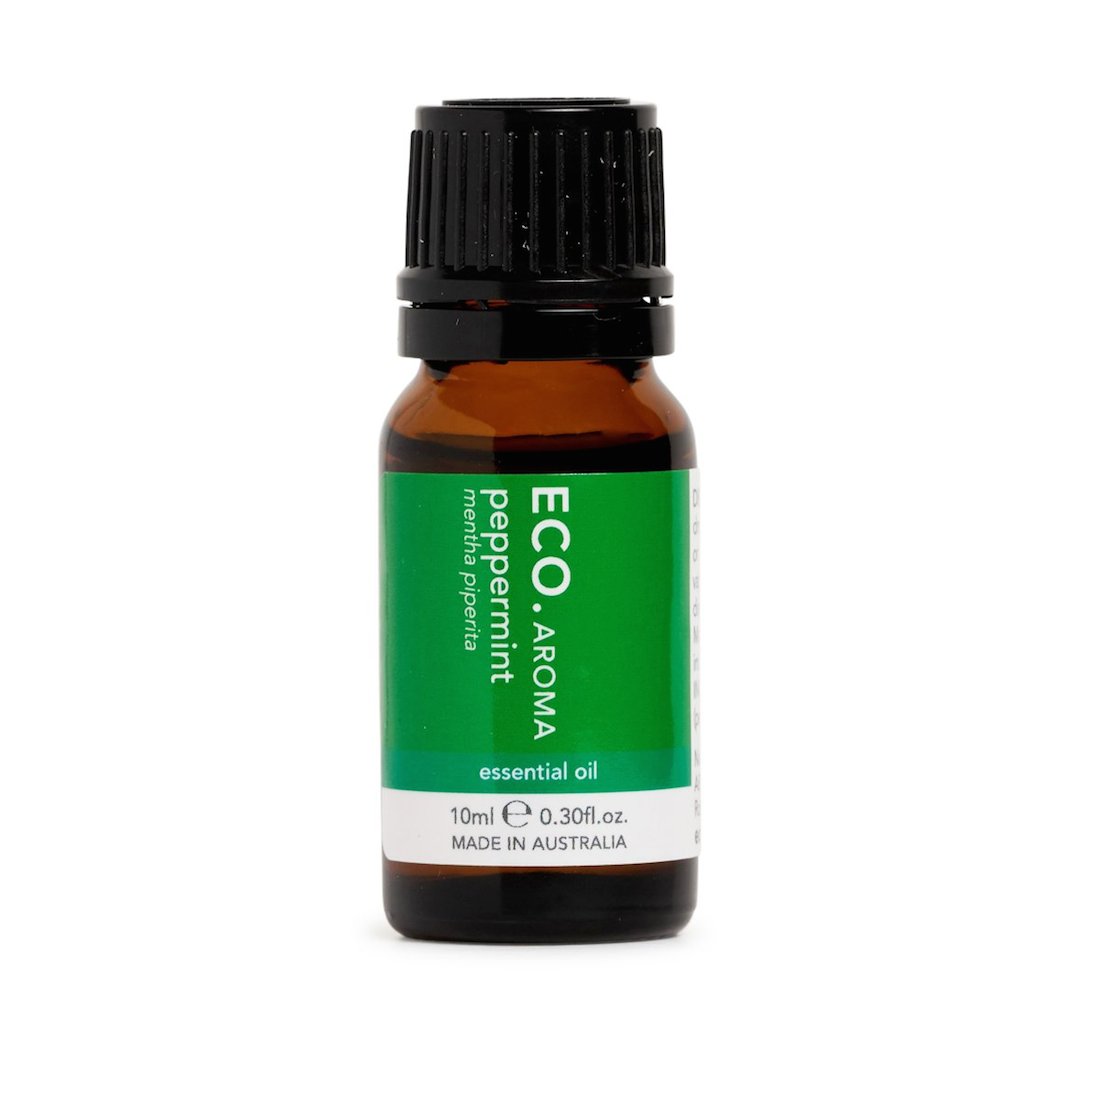 Peppermint eco essential oil